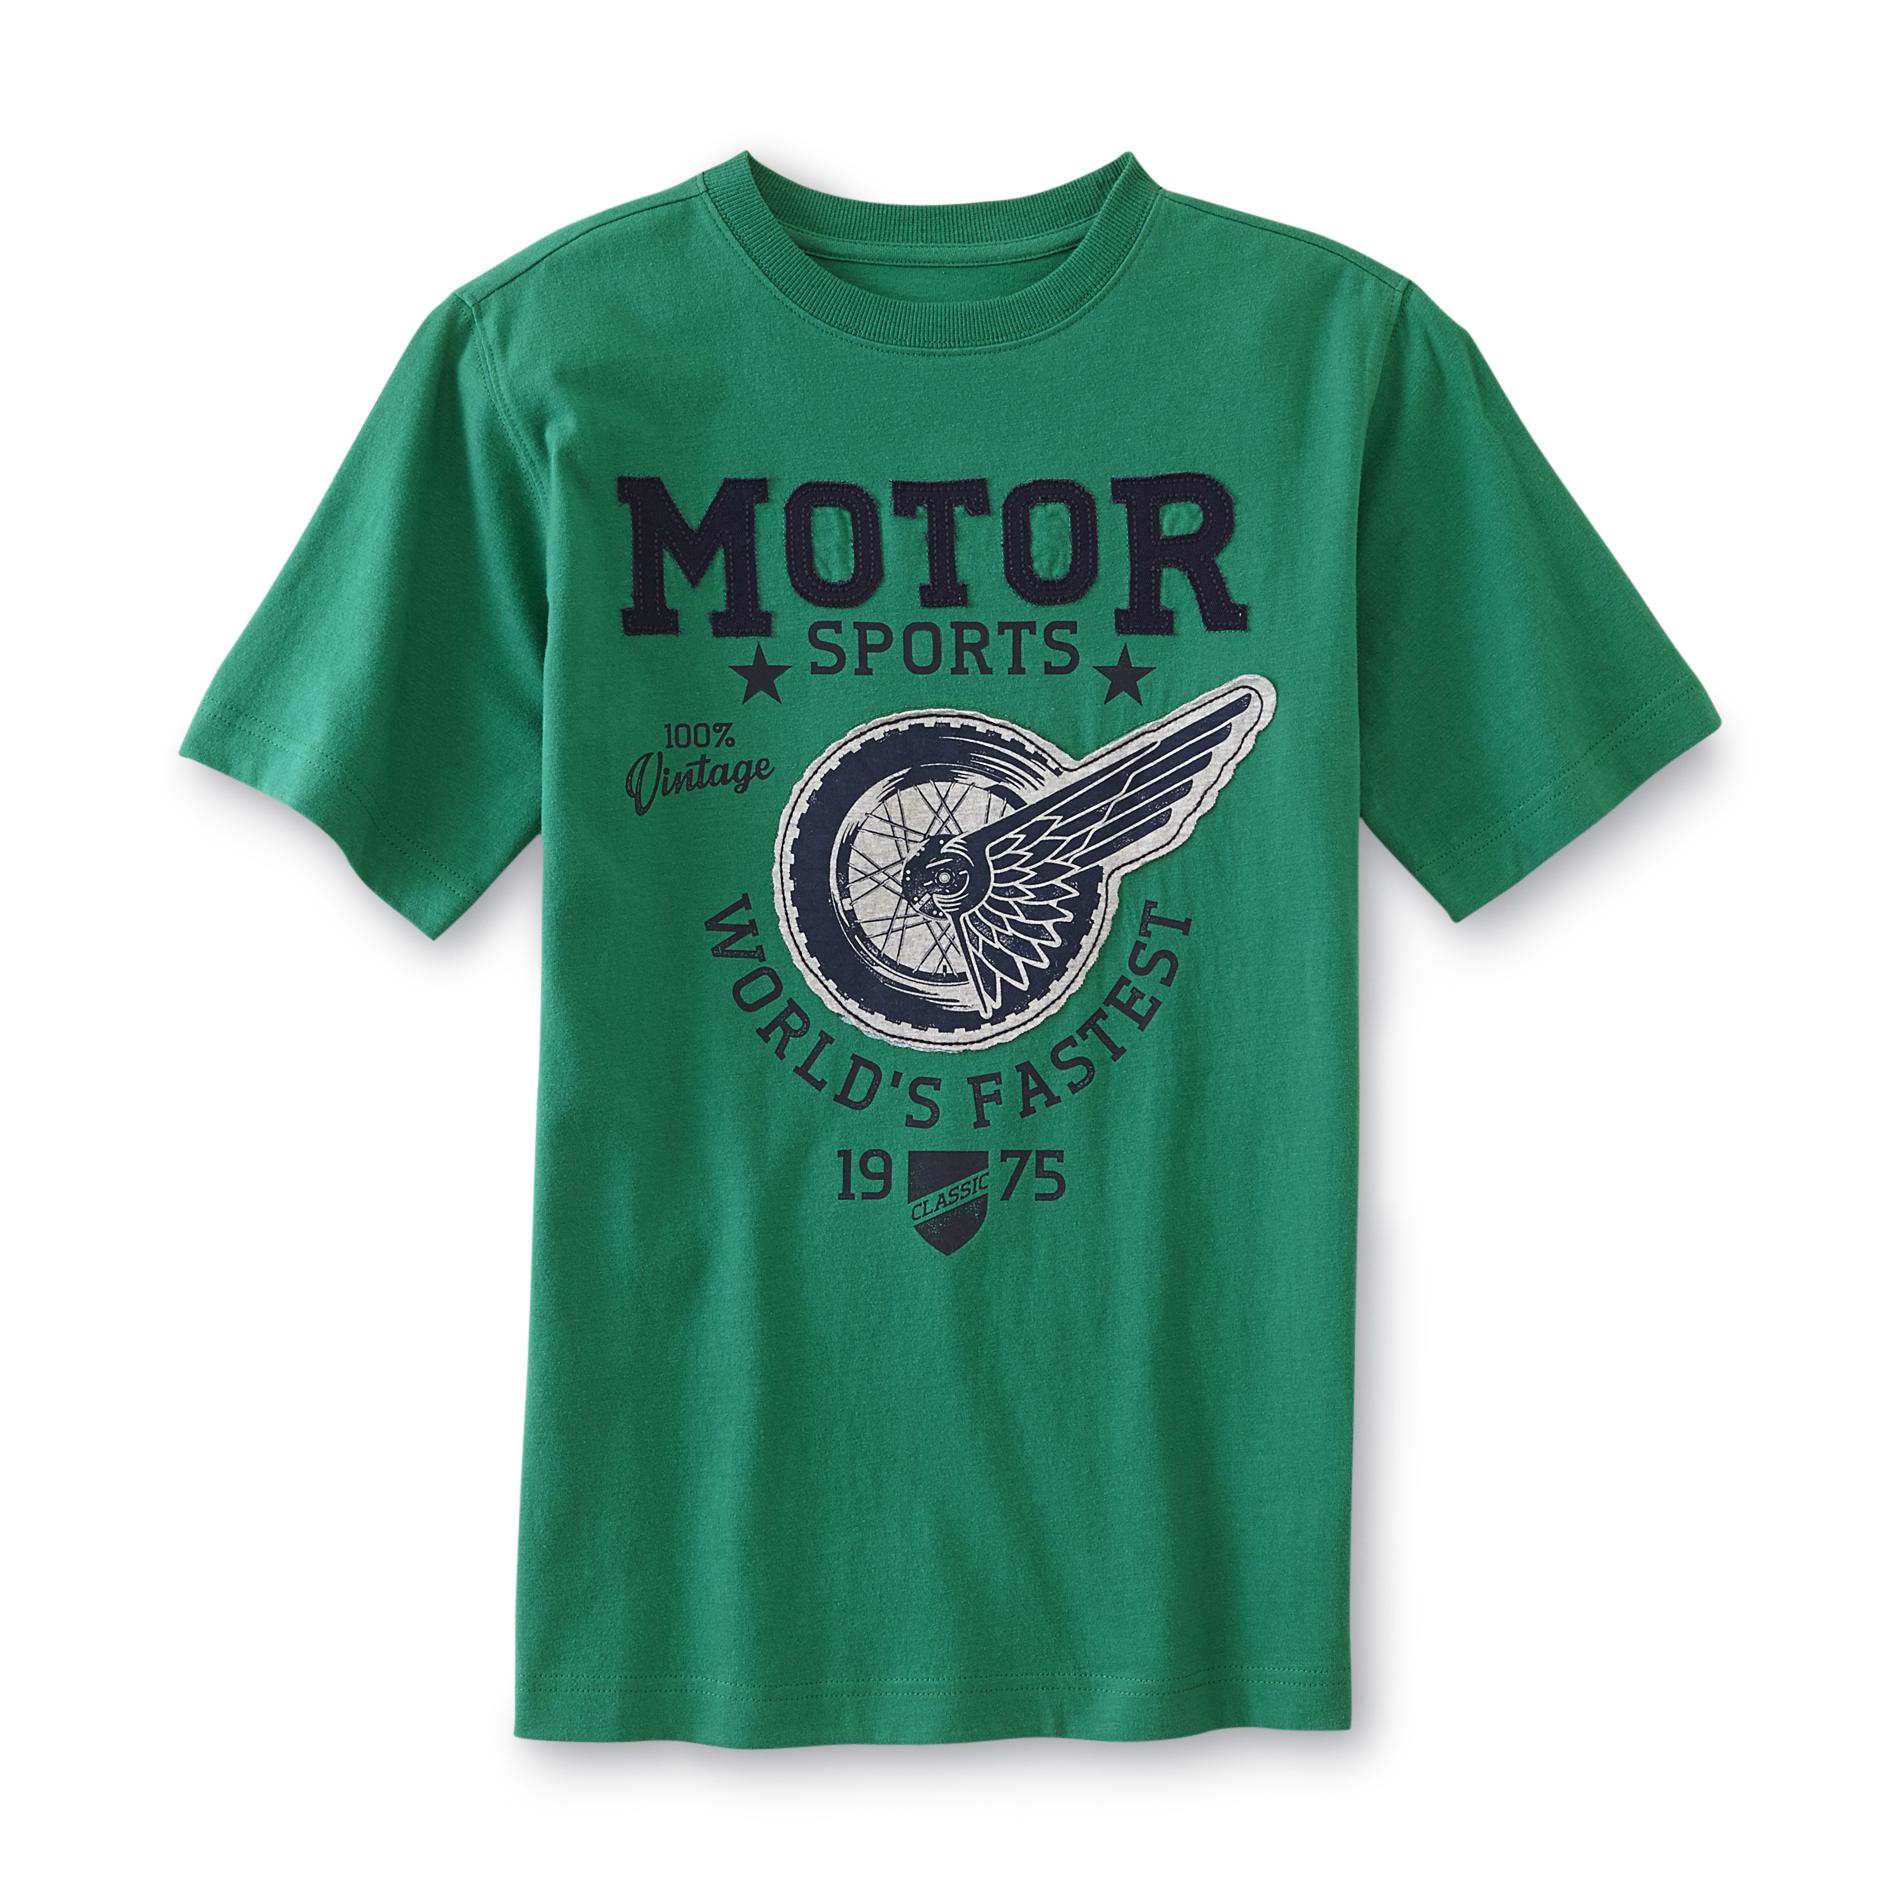 Canyon River Blues Boy's Embroidered T-Shirt - Motorsports